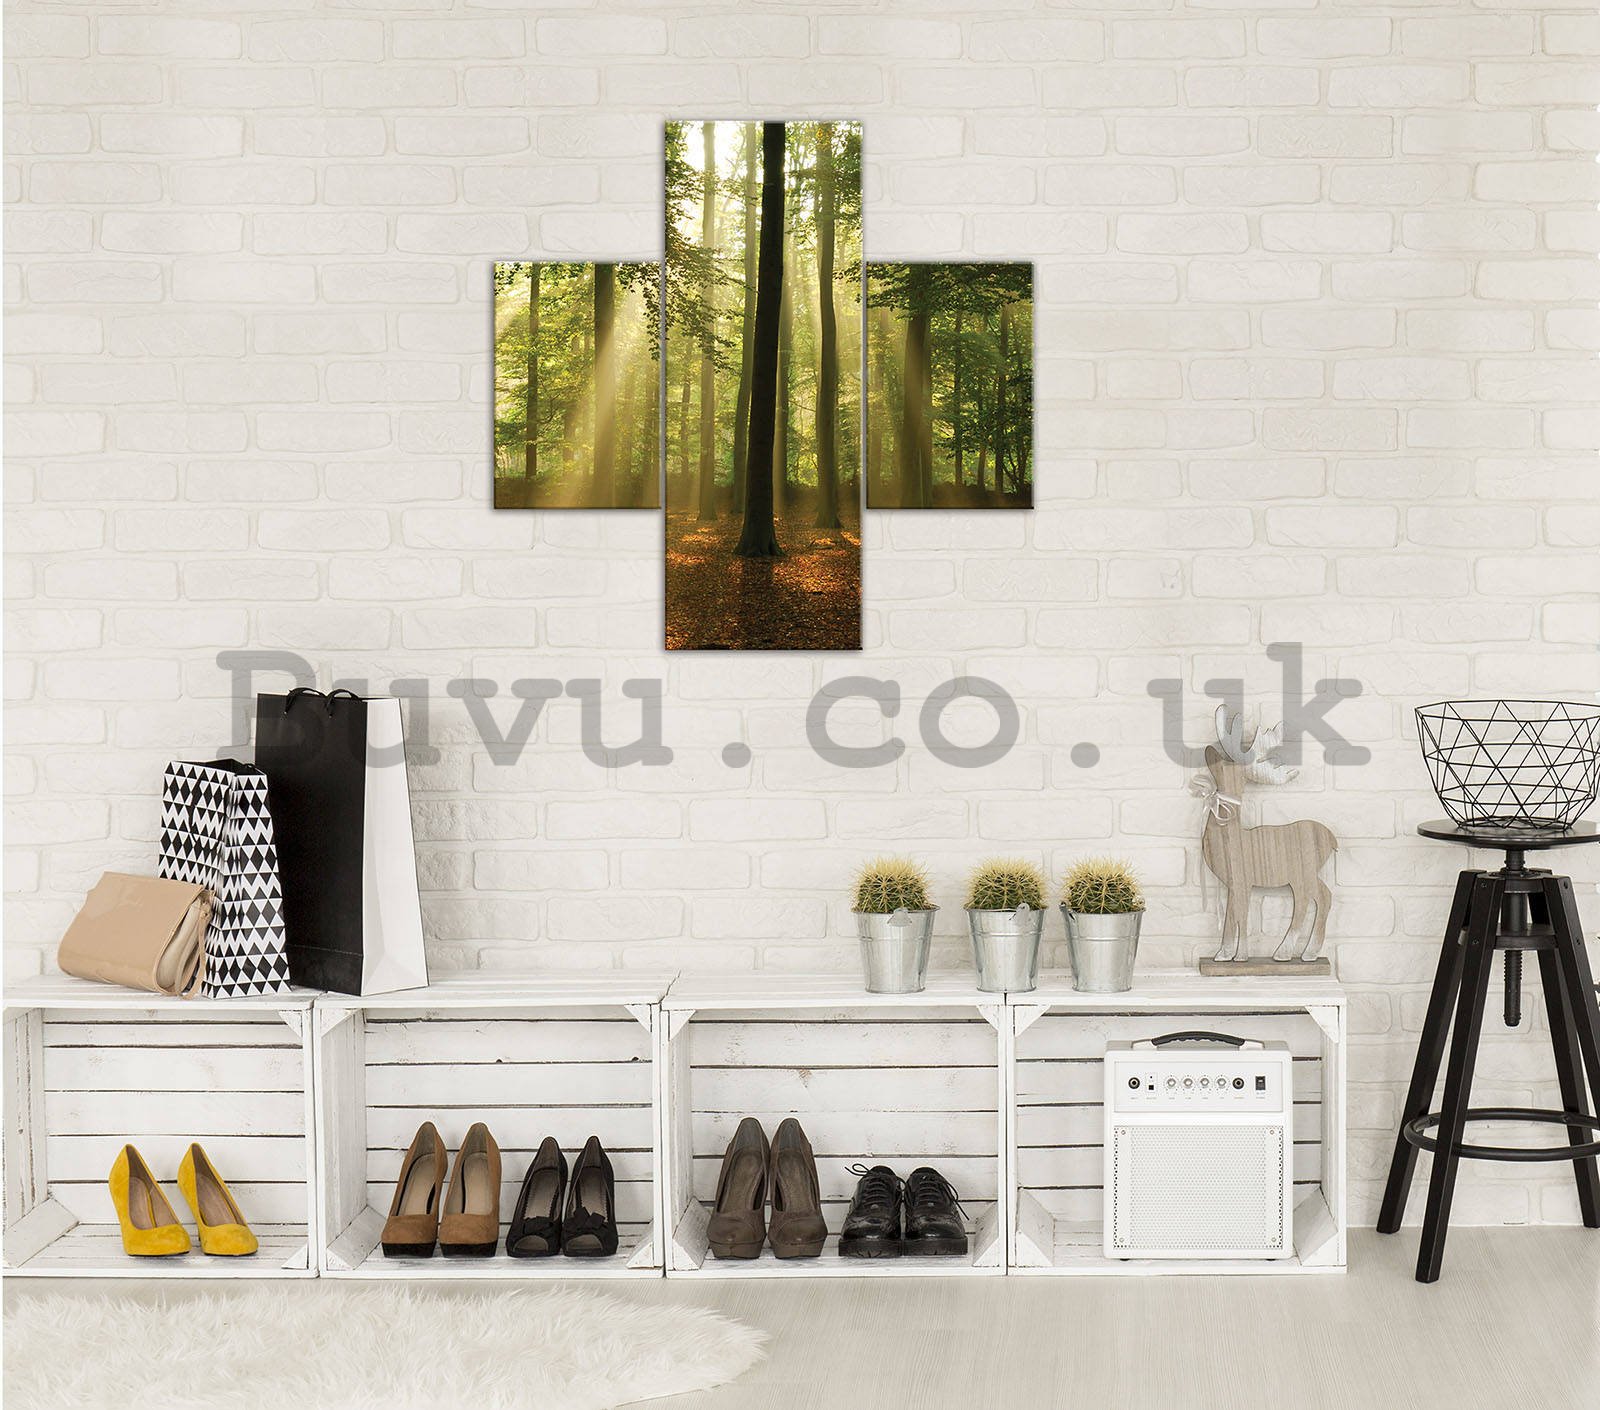 Painting on canvas: Sun in the Forest (4) - set 1pc 80x30 cm and 2pc 37,5x24,8 cm